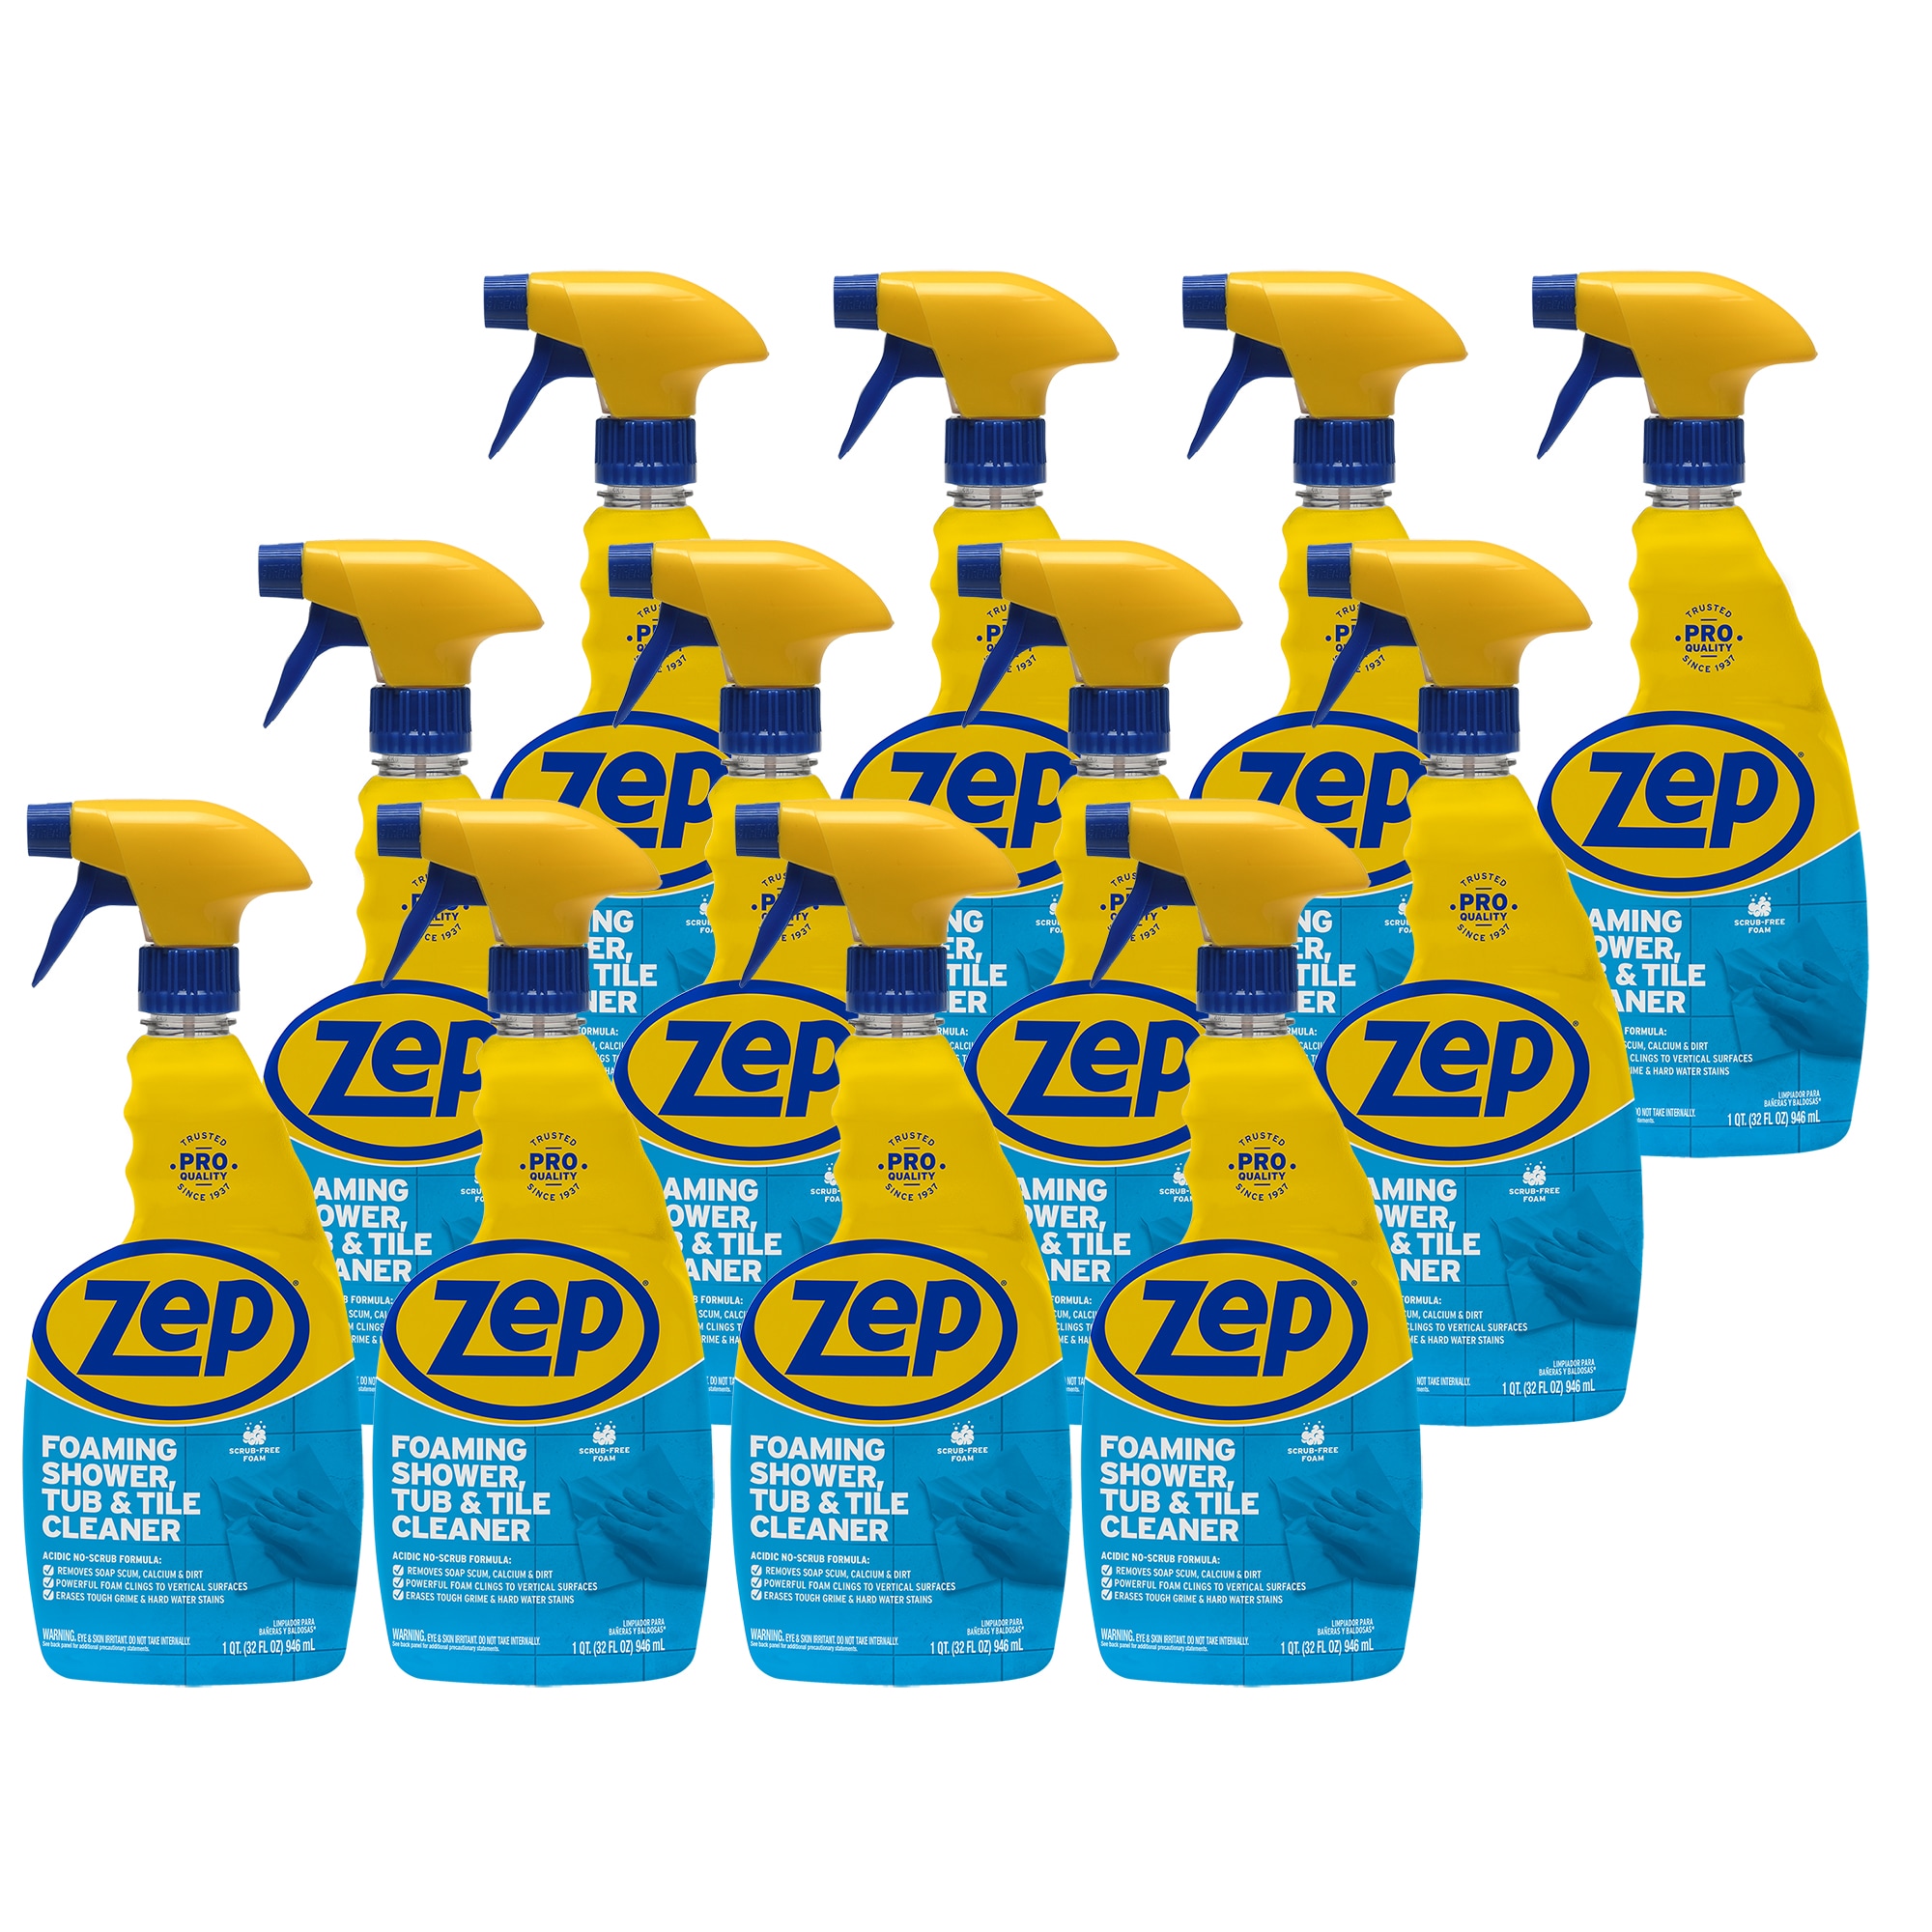 Zep Shower Tub and Tile Cleaner 1 Gallon ZUSTT128 (Case of 2) - No Scrub  Pro Formula Breaks up Tough Buildup on Contact